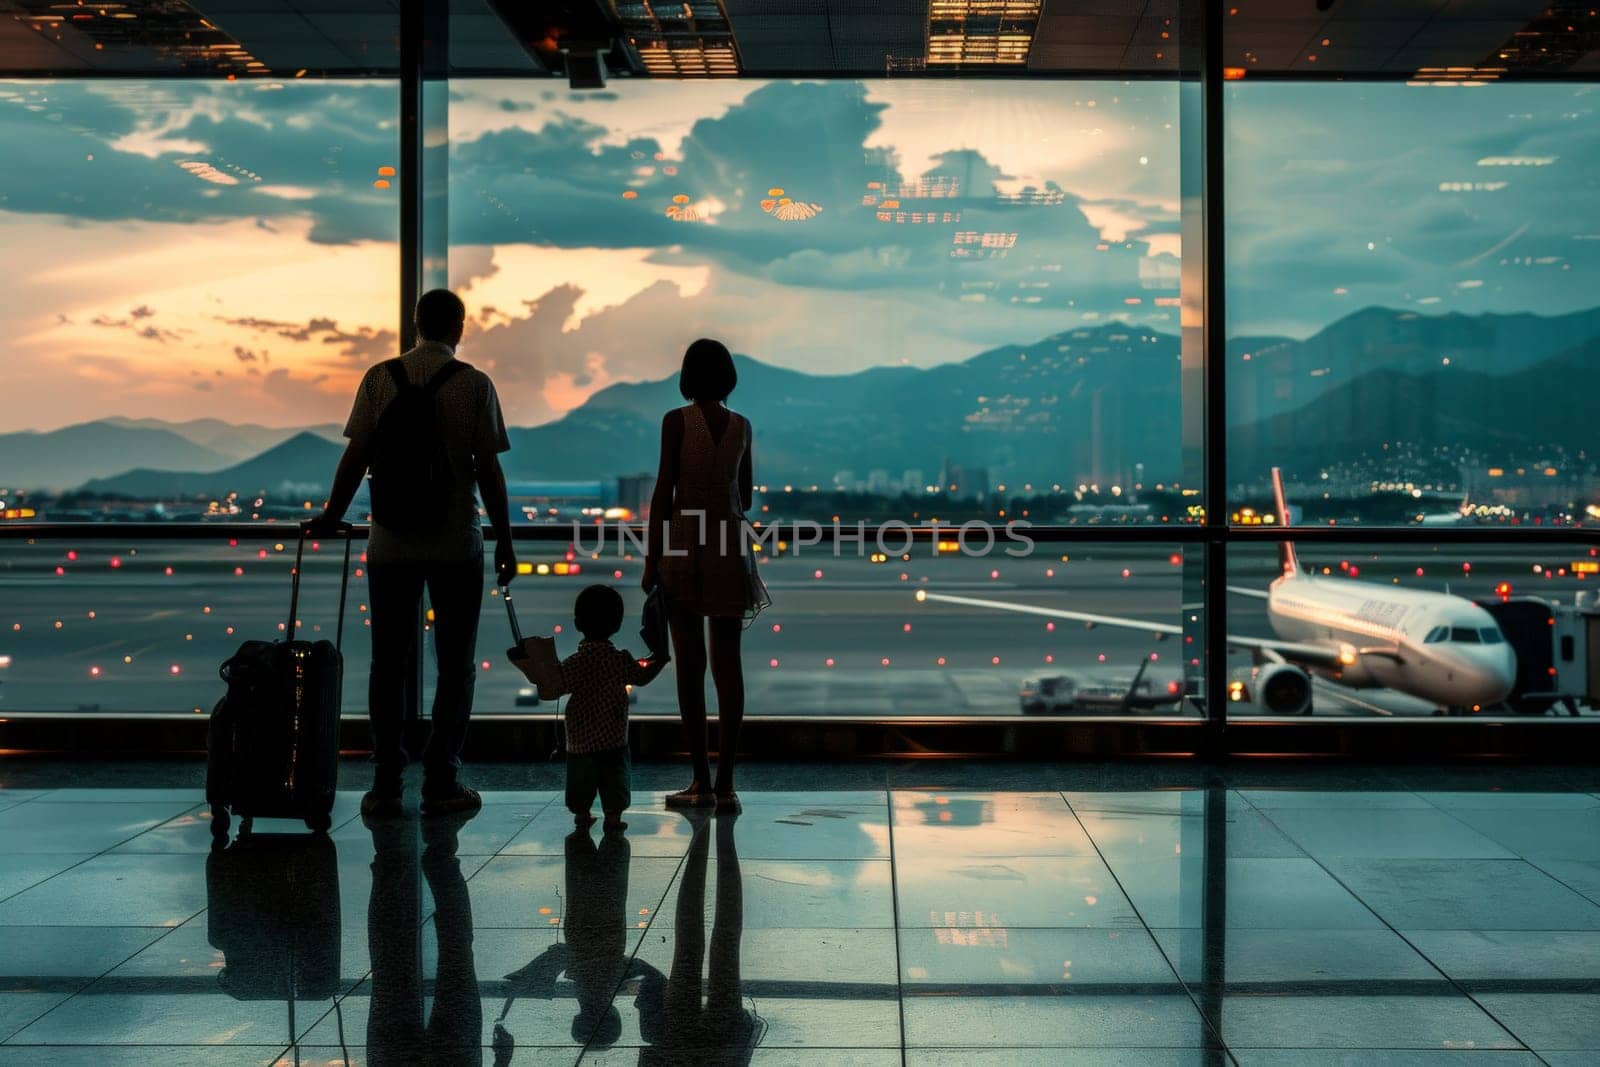 Family Travel trip, silhouette figures of family members inside an airport terminal.